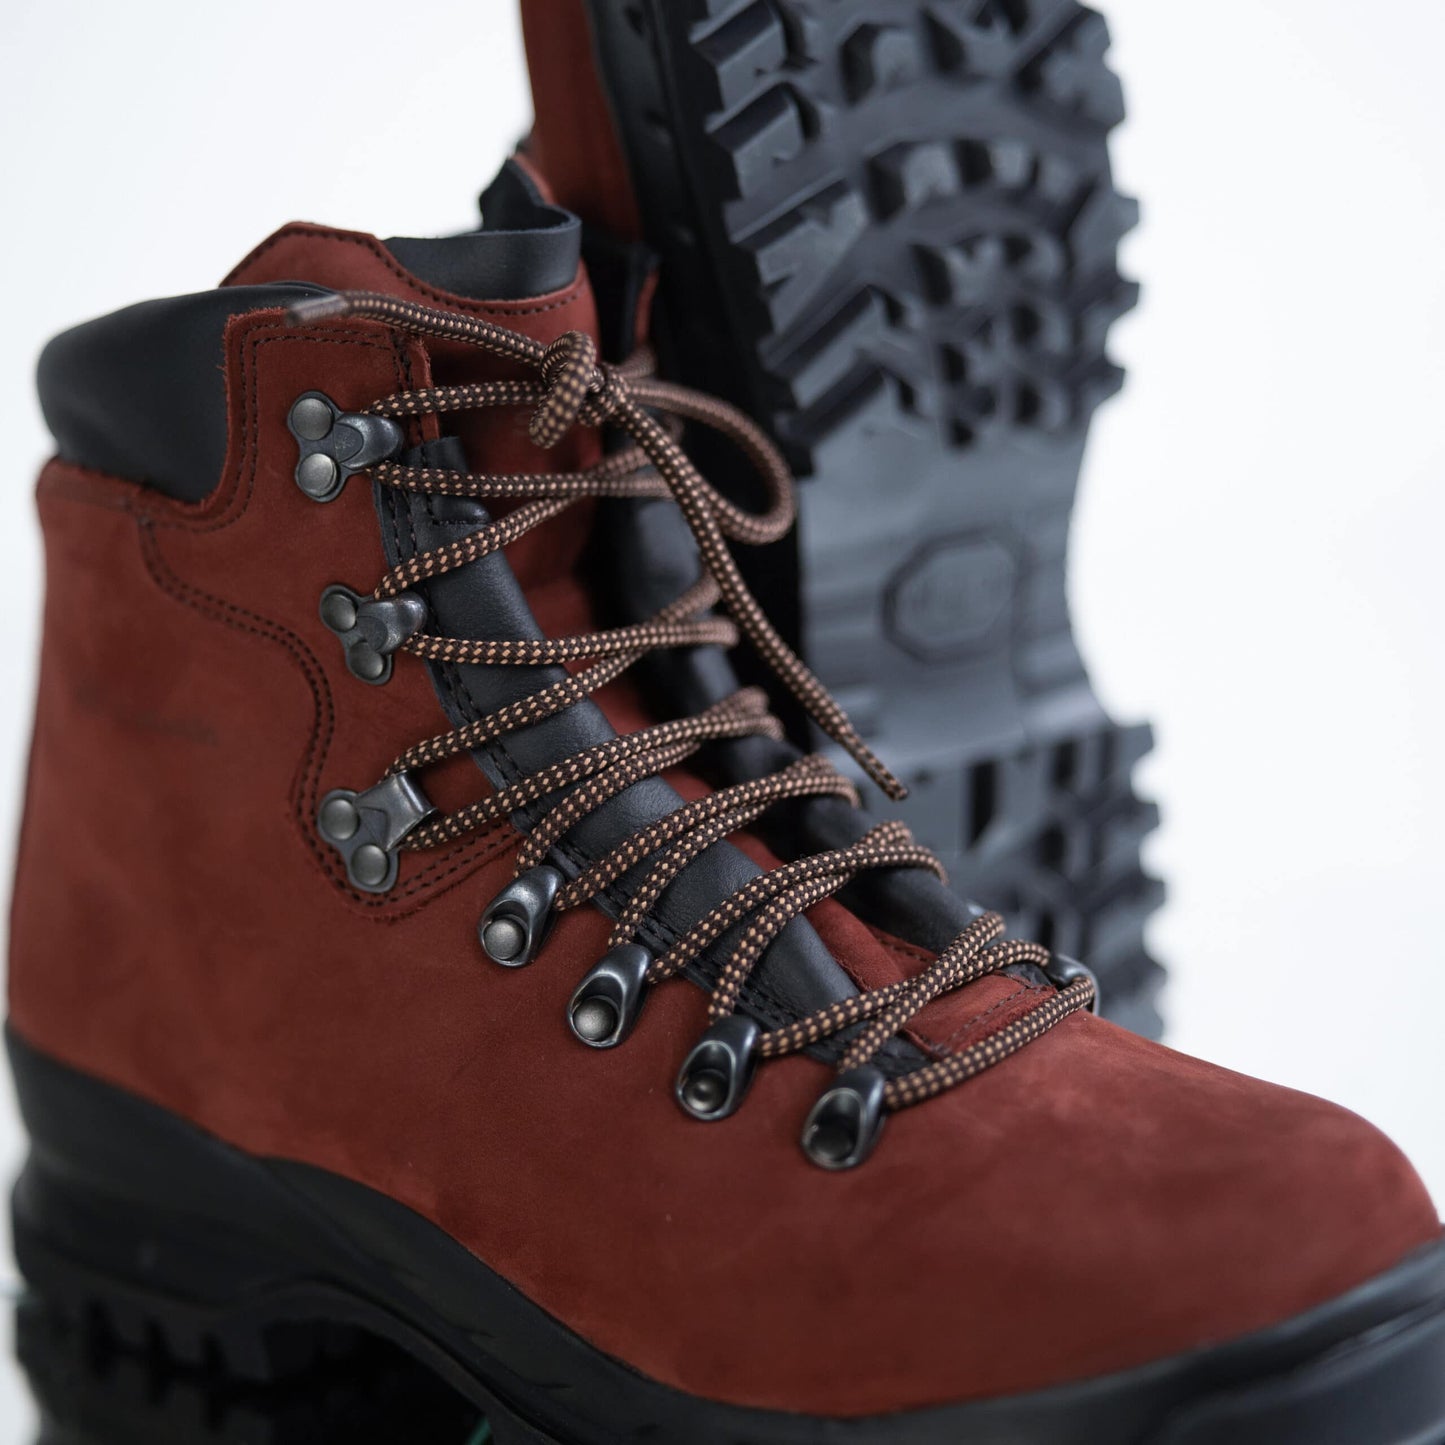 5531 Rosso Aragosta Hiking Boots